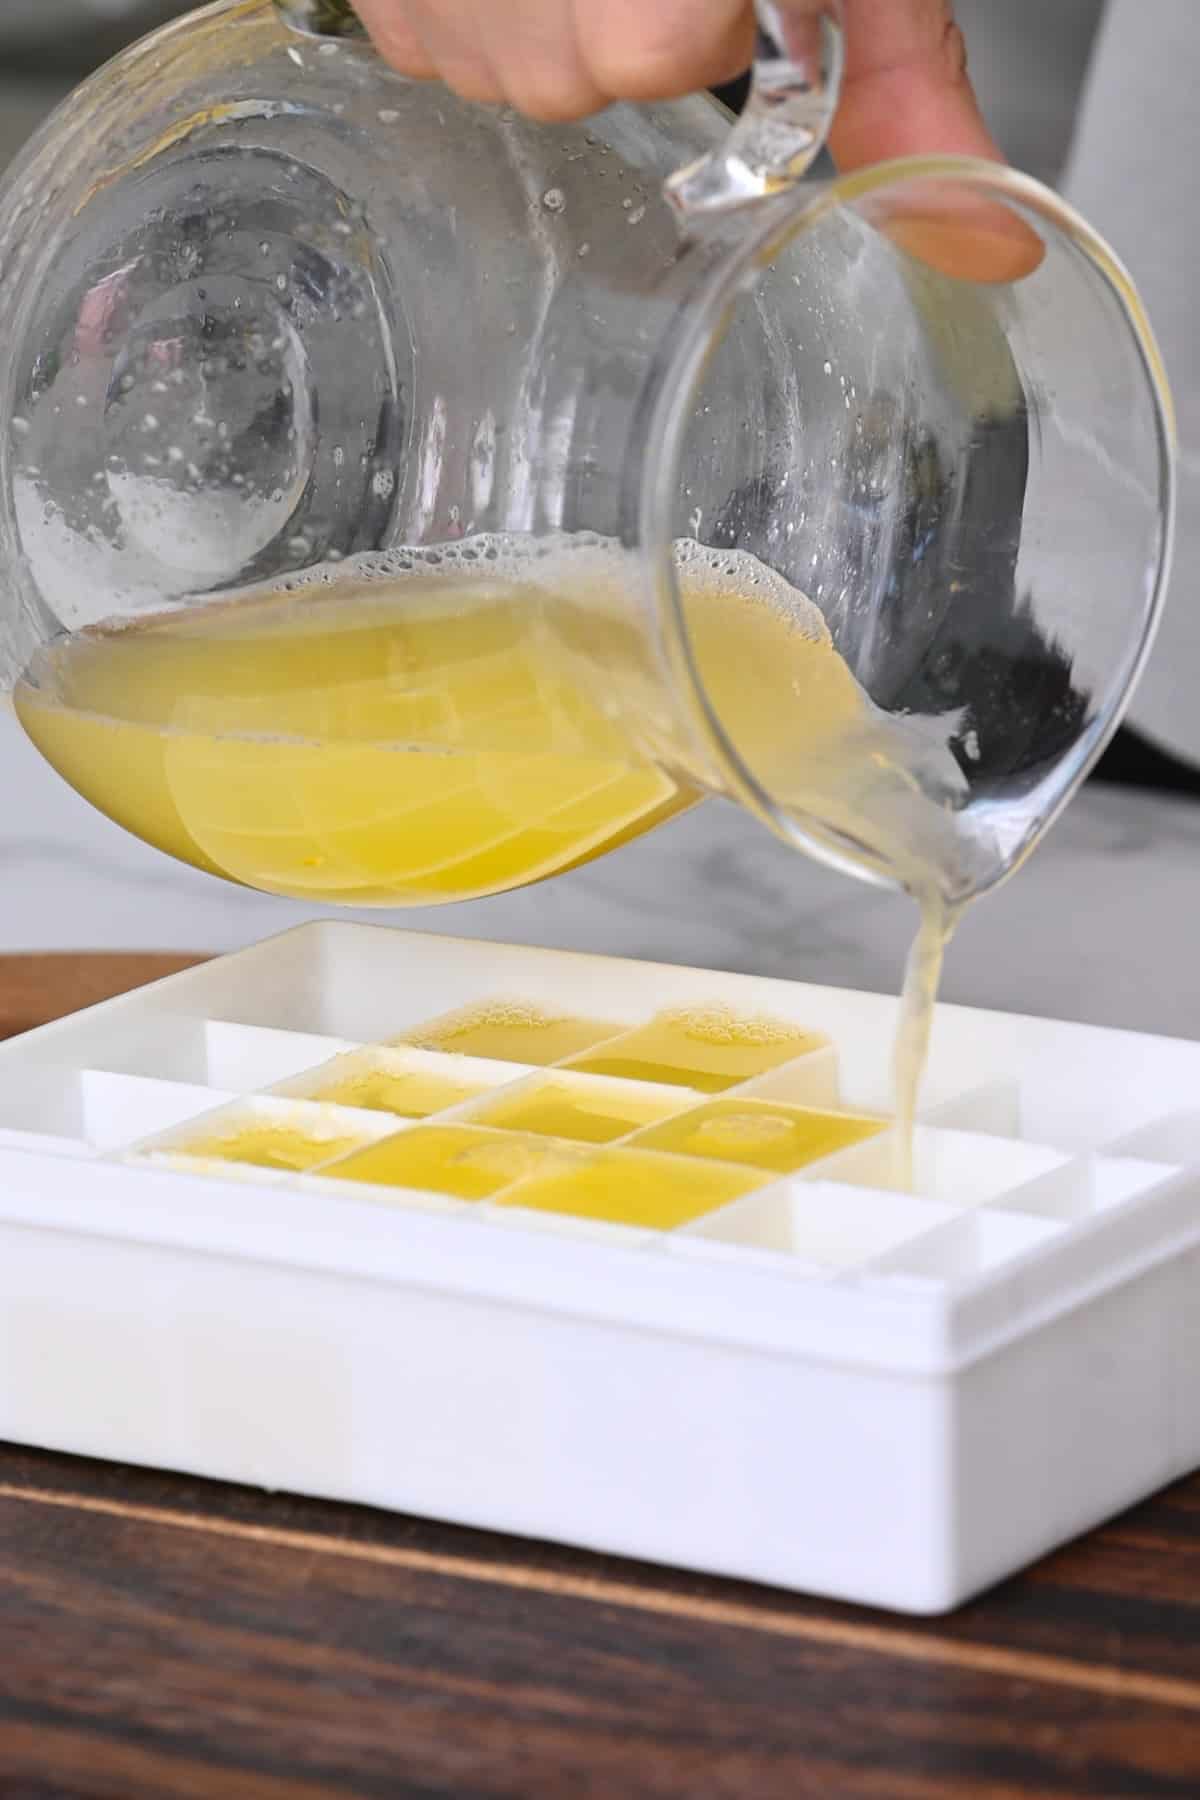 Pouring lemon juice in an ice cube tray